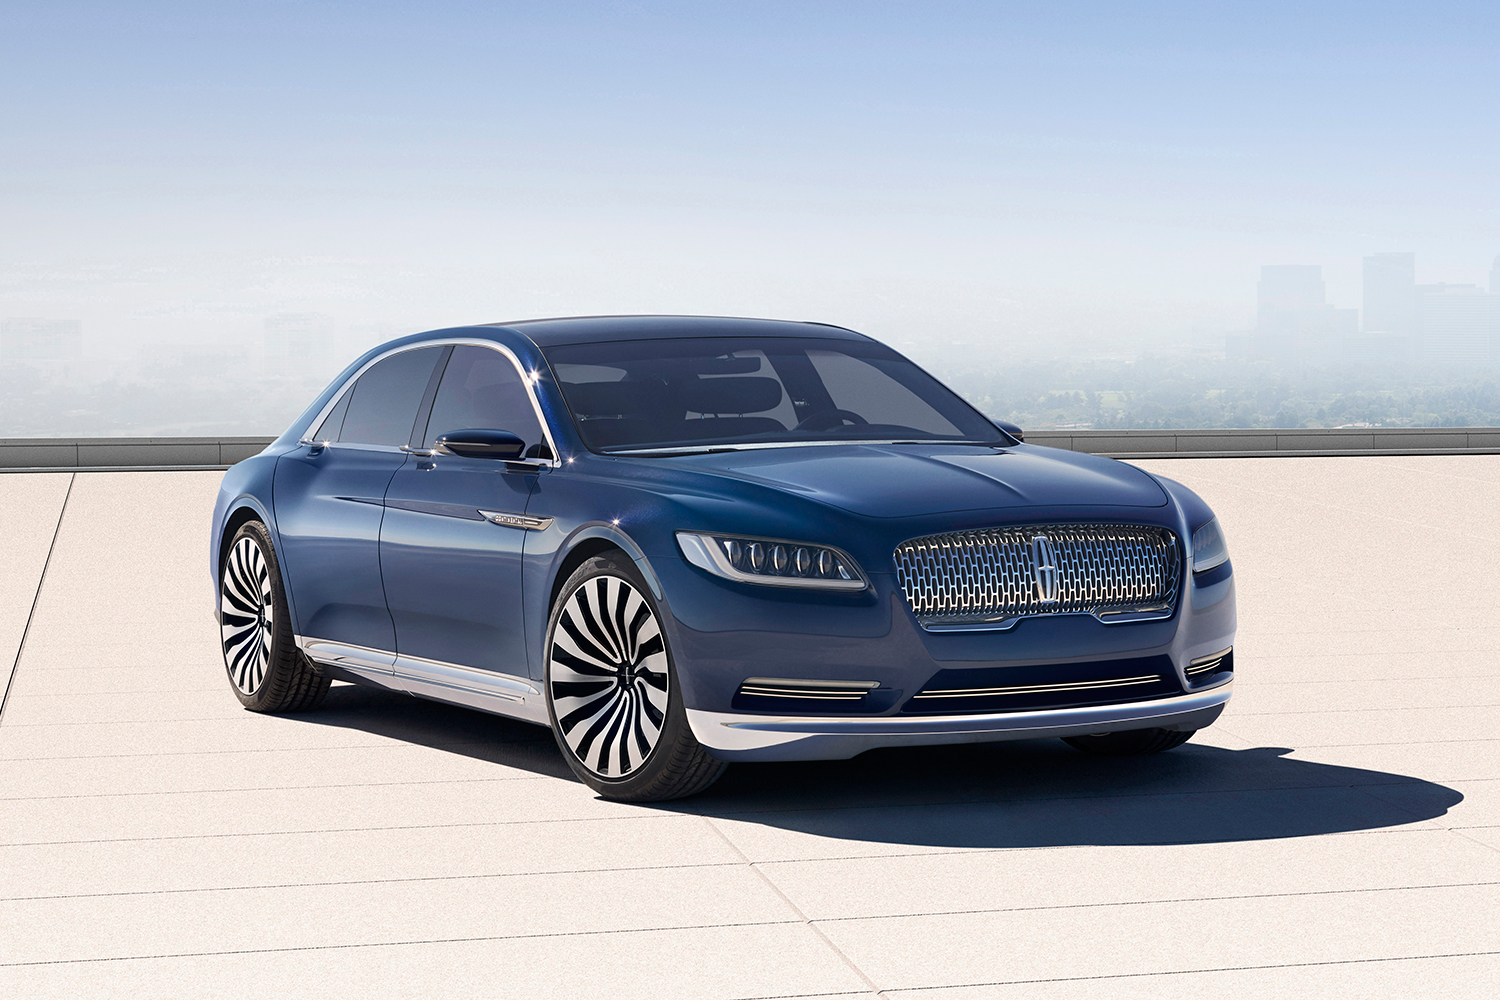 top 5 concept cars of 2015 opinion pictures specs lincolncontinentalconcept 01 front